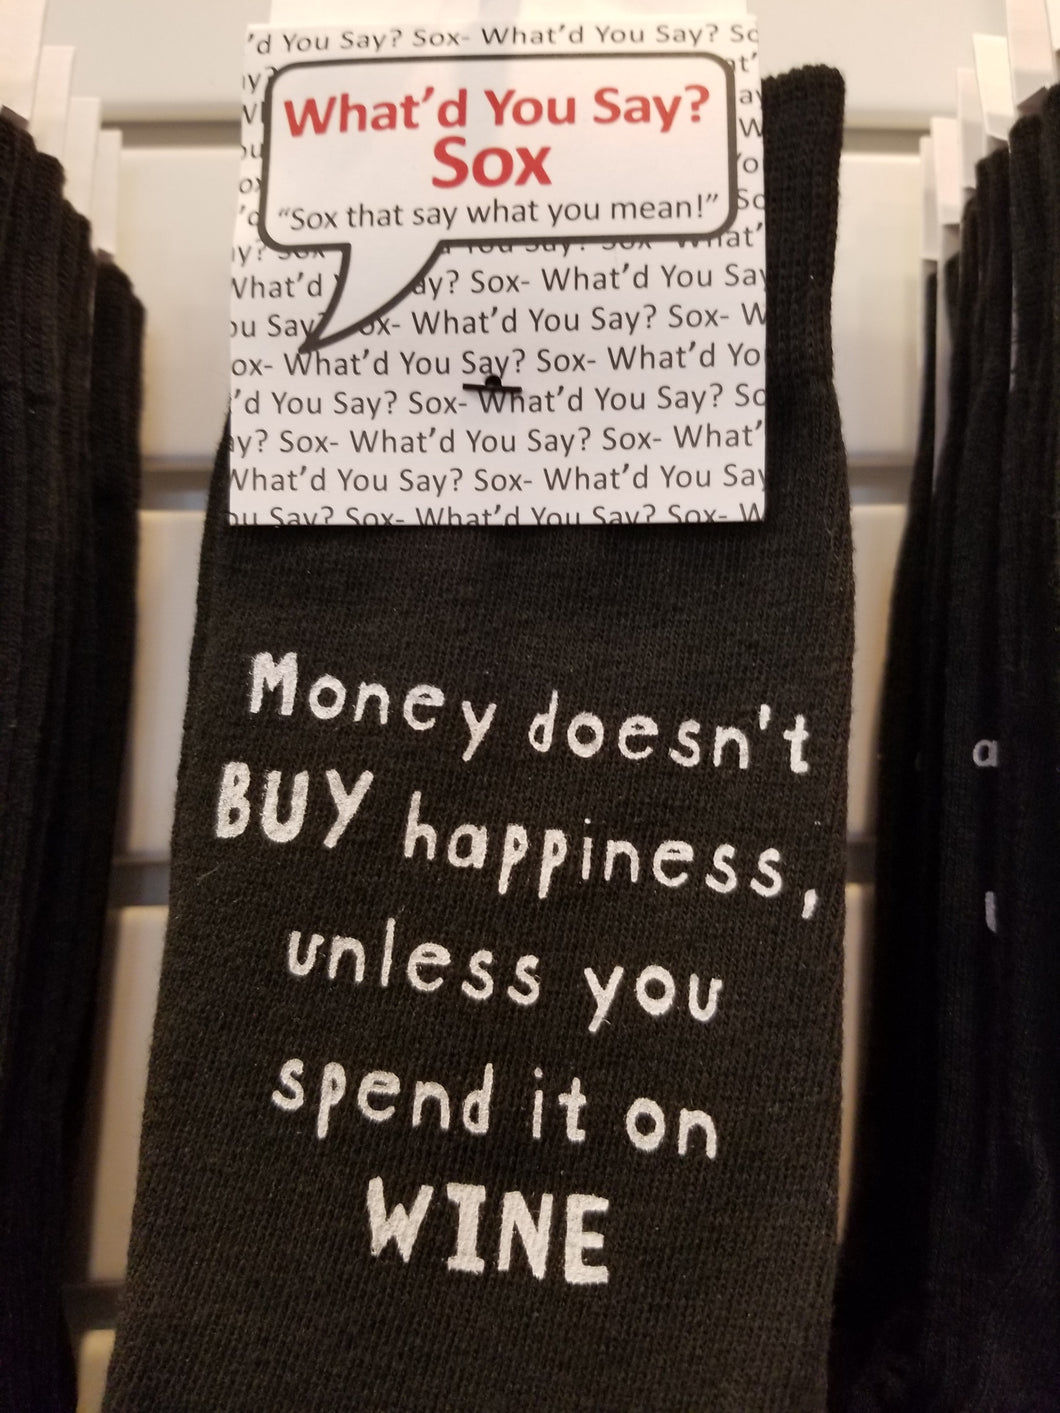 Money doesn't buy happiness - Sox